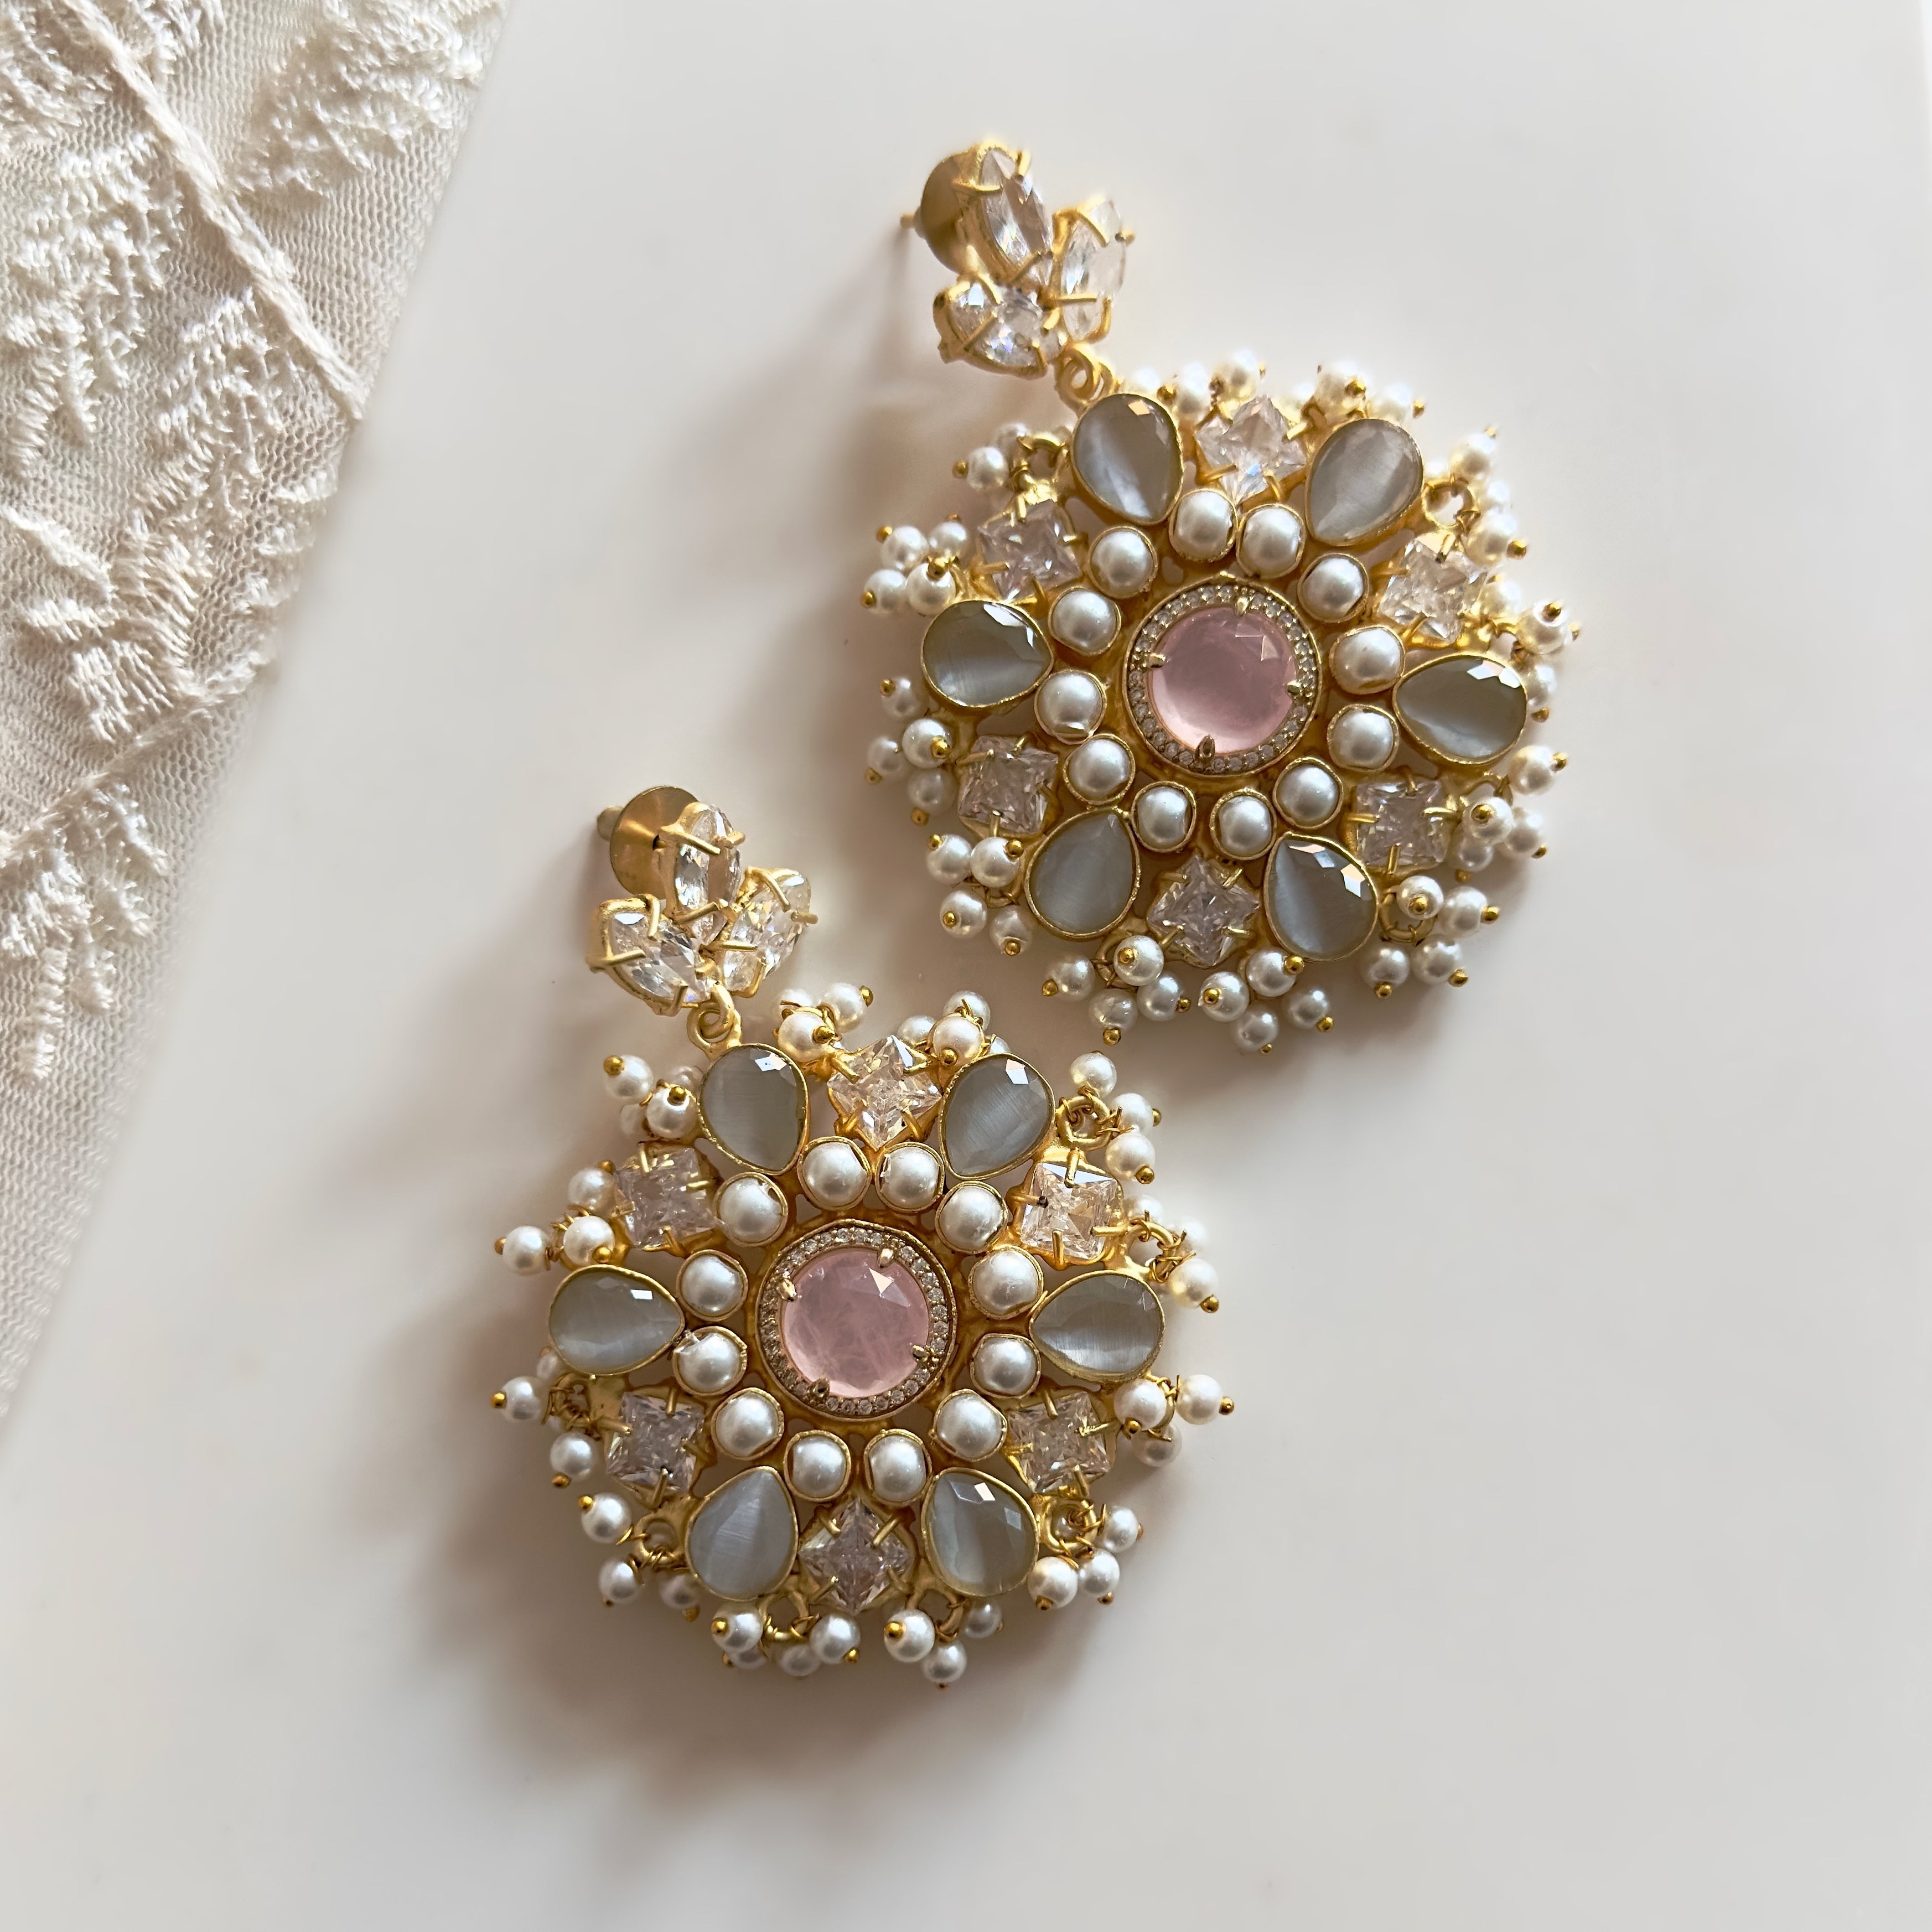 Elevate your look with our Lou Crystal Drop Earrings. The stunning hues of pink and grey, accented by luxurious cz crystals, will add an elegant touch to any outfit. With its stunning statement design, these earrings are the perfect accessory for any occasion. Make a sophisticated statement with Lou.